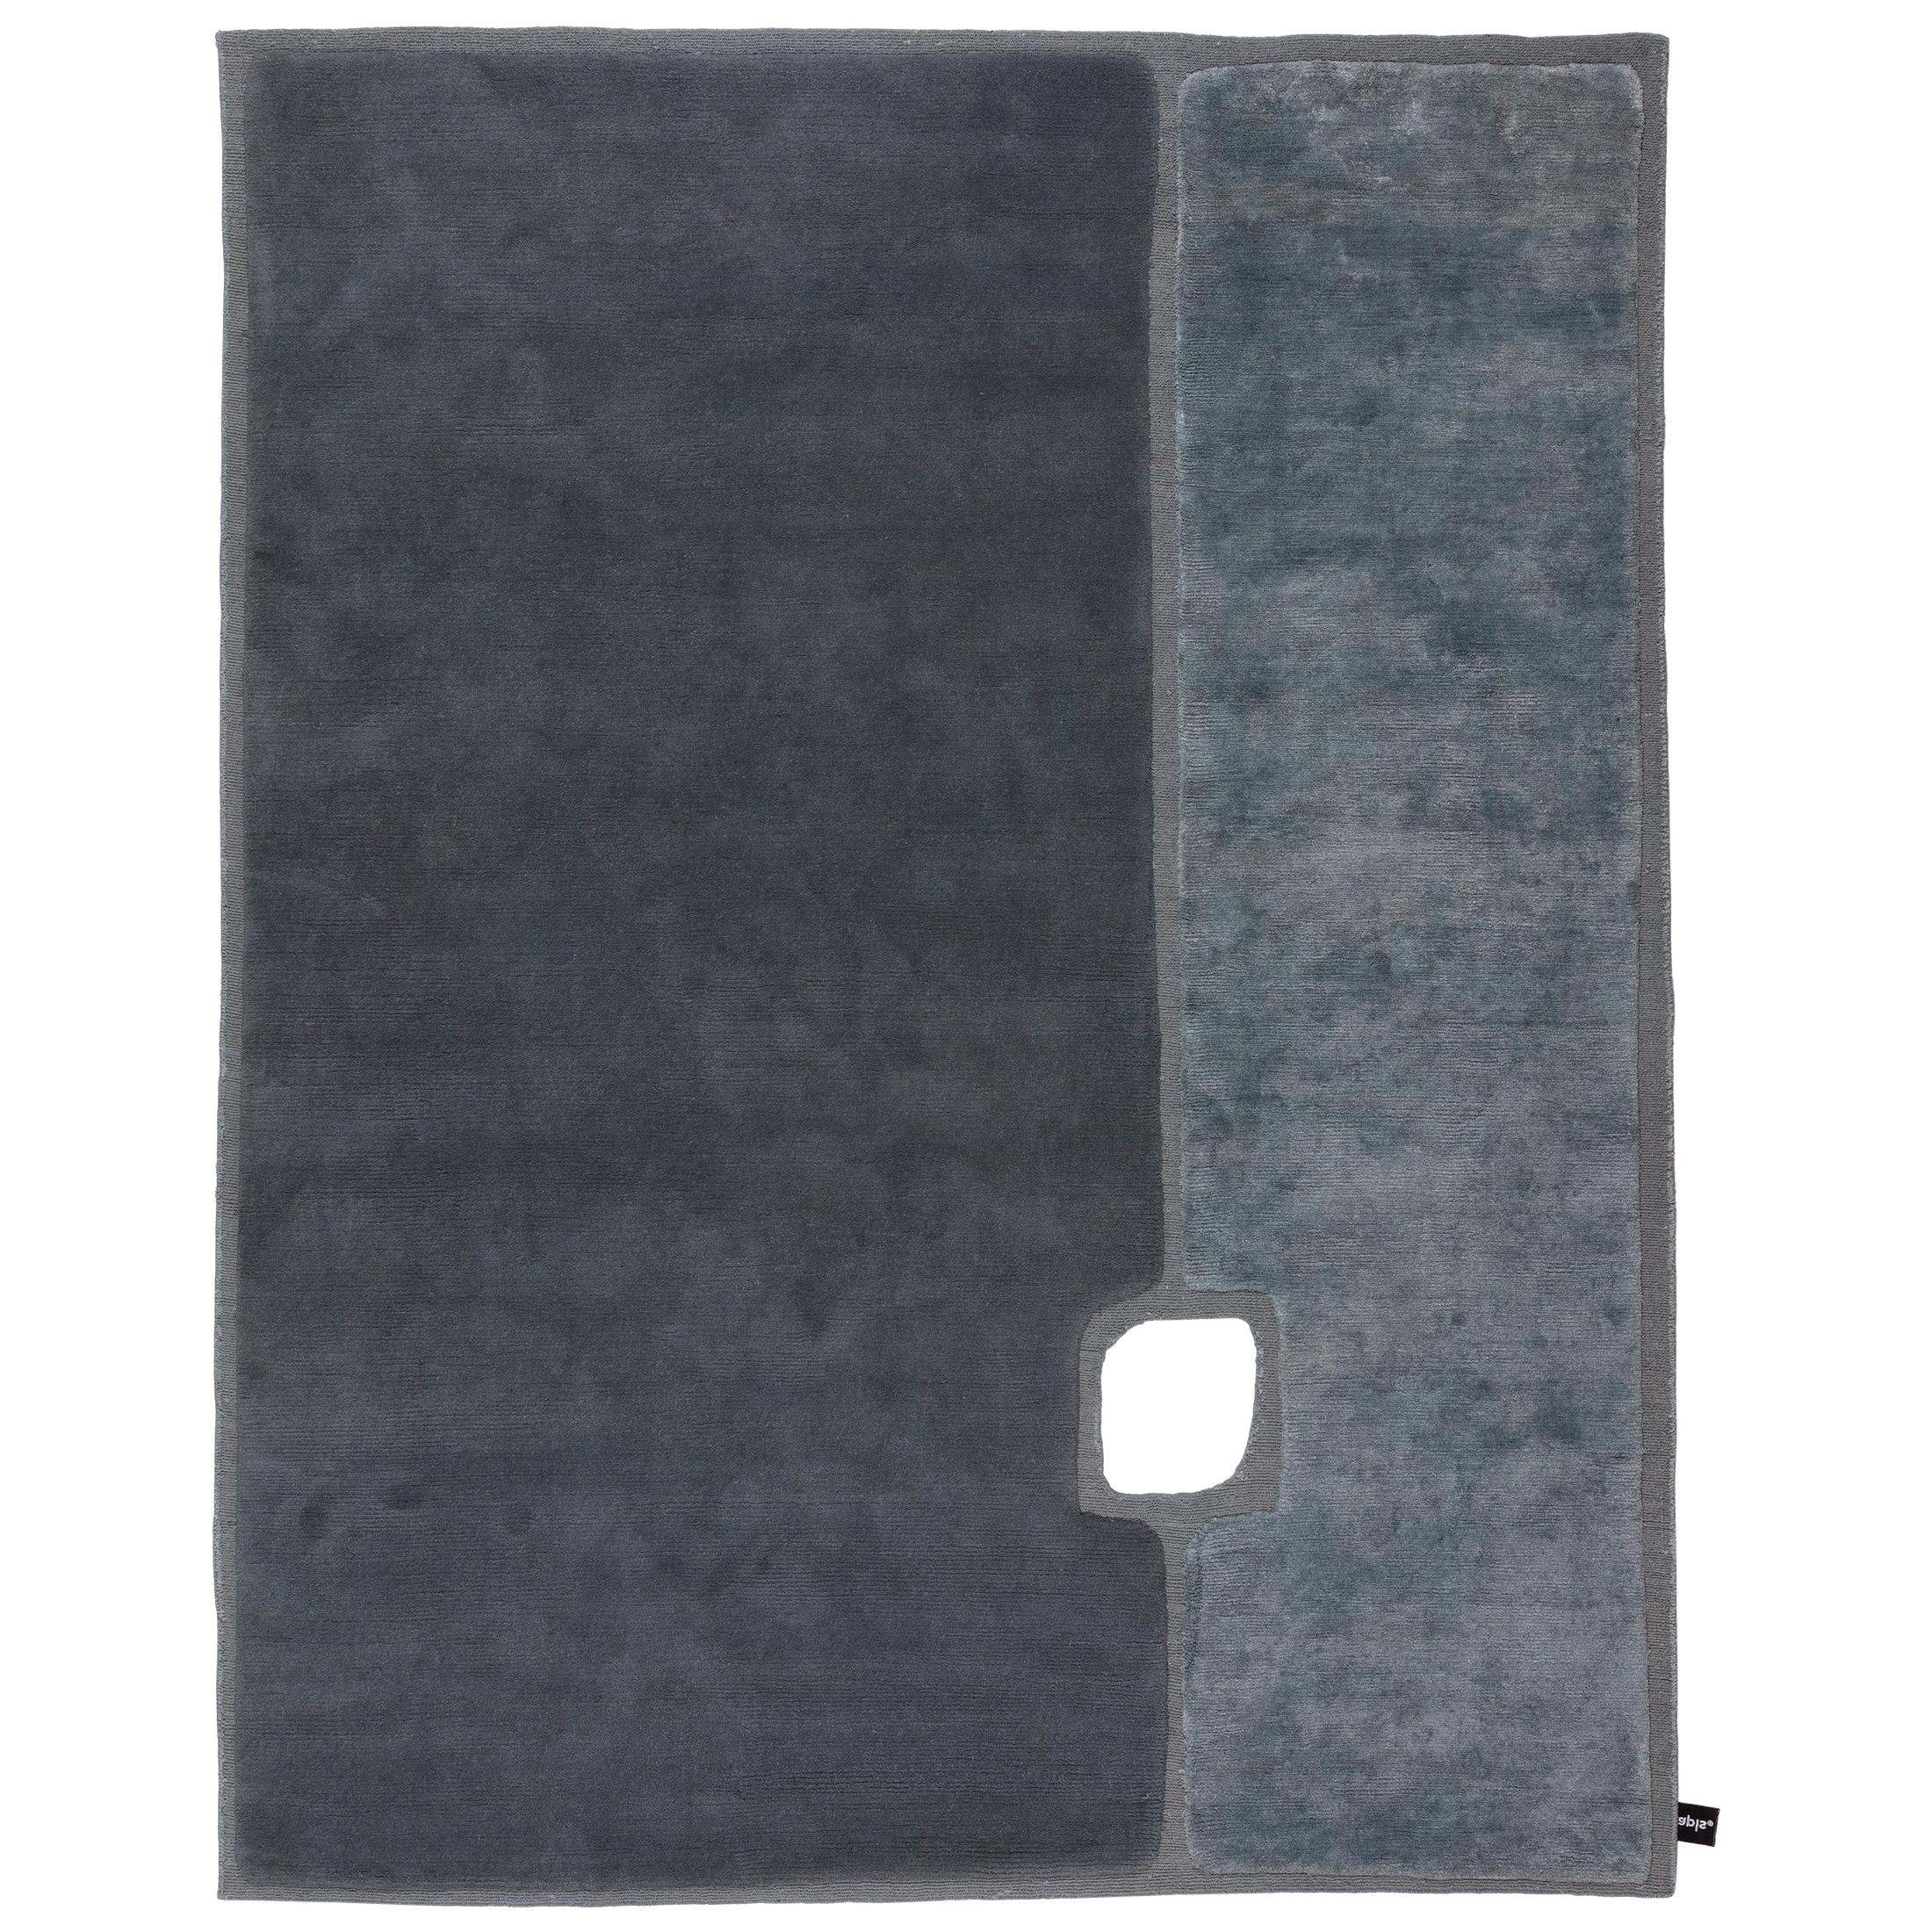 cc-tapis Cut Out Monocromo Hole Rug by A. Parisotto and M. Formenton